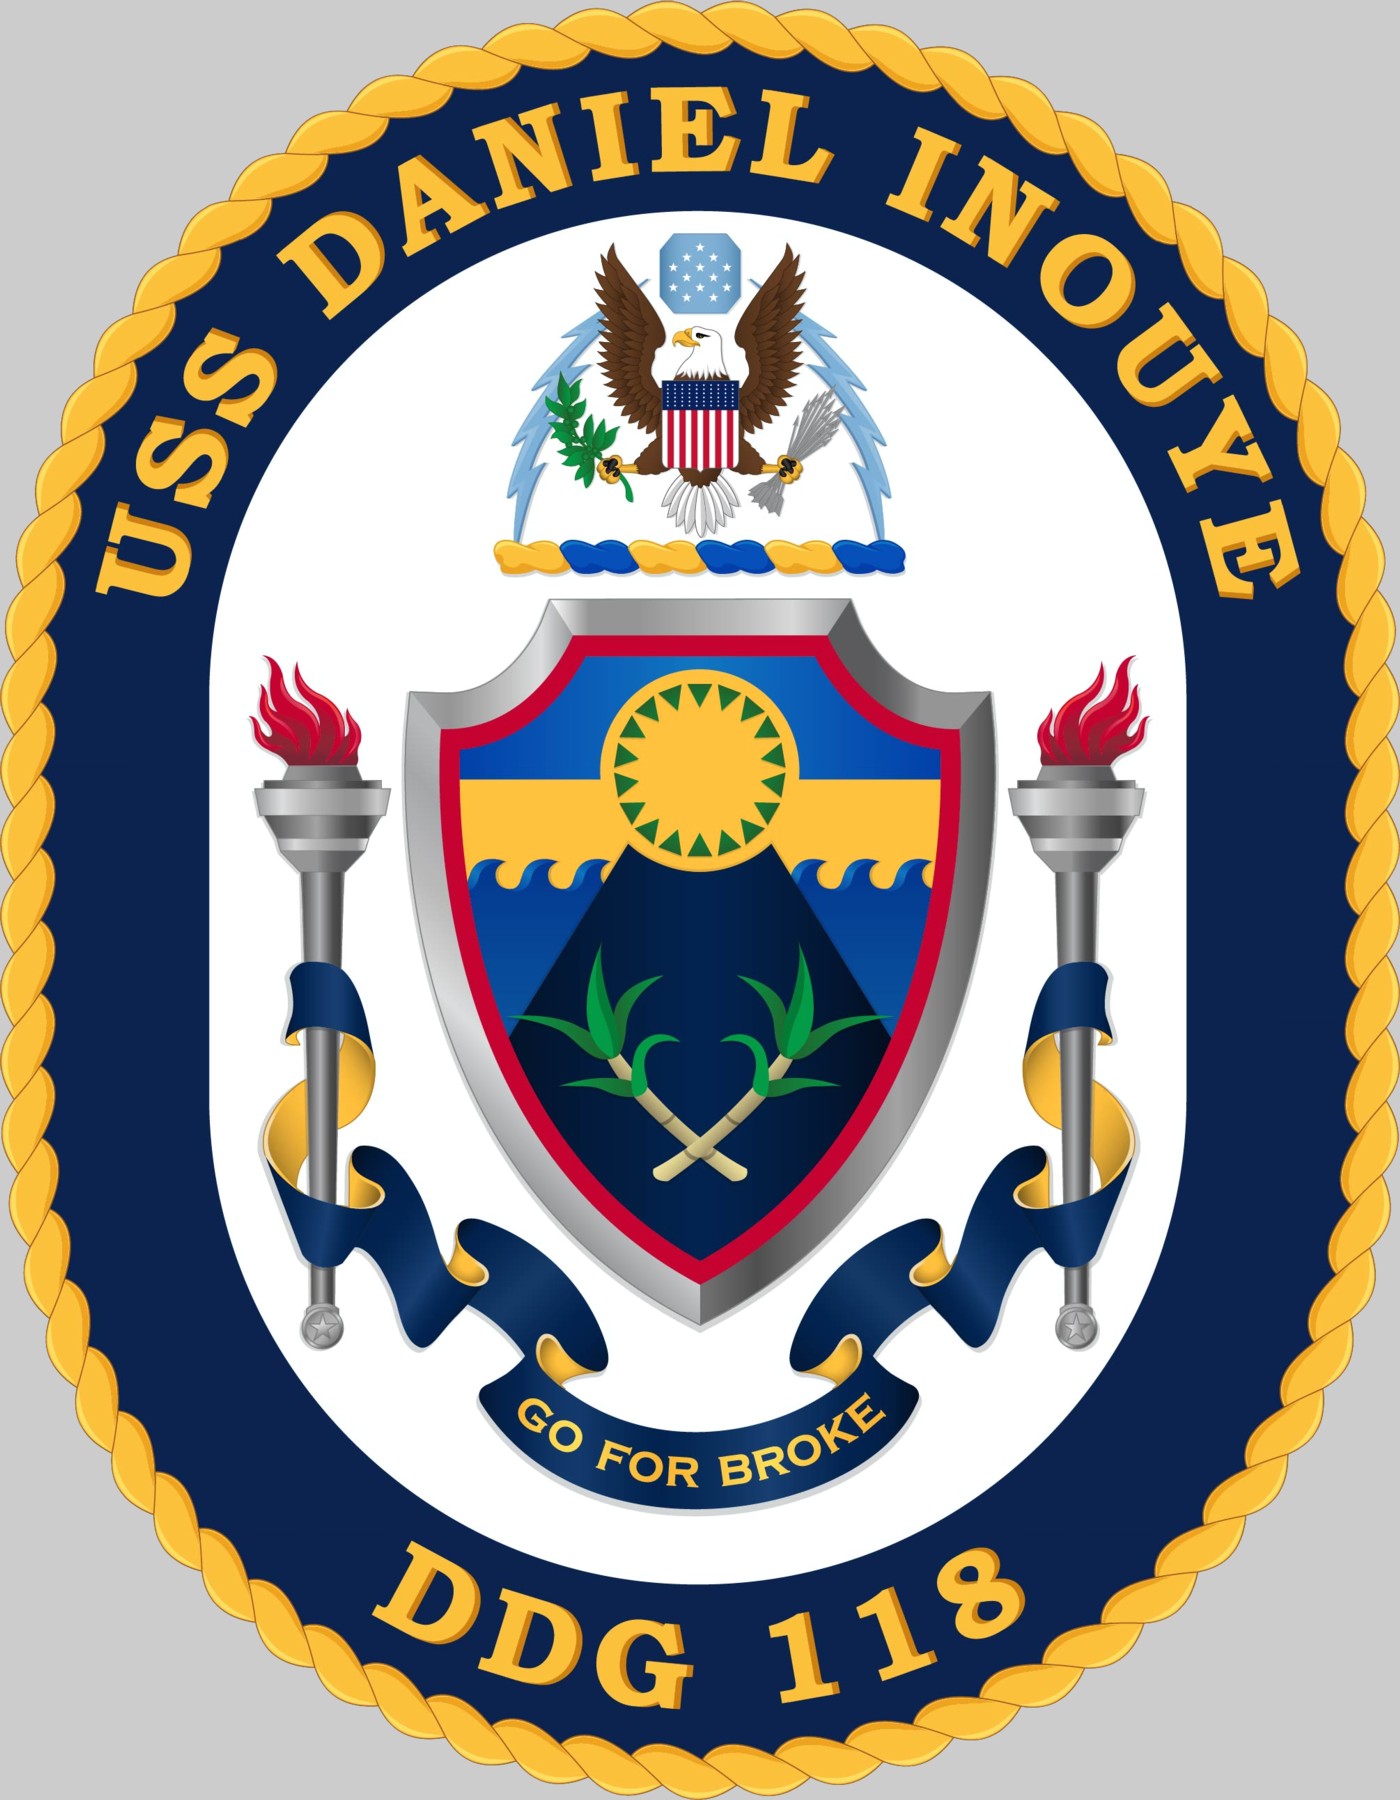 ddg-118 uss daniel inouye insignia crest patch badge arleigh burke class guided missile destroyer us navy aegis 02c